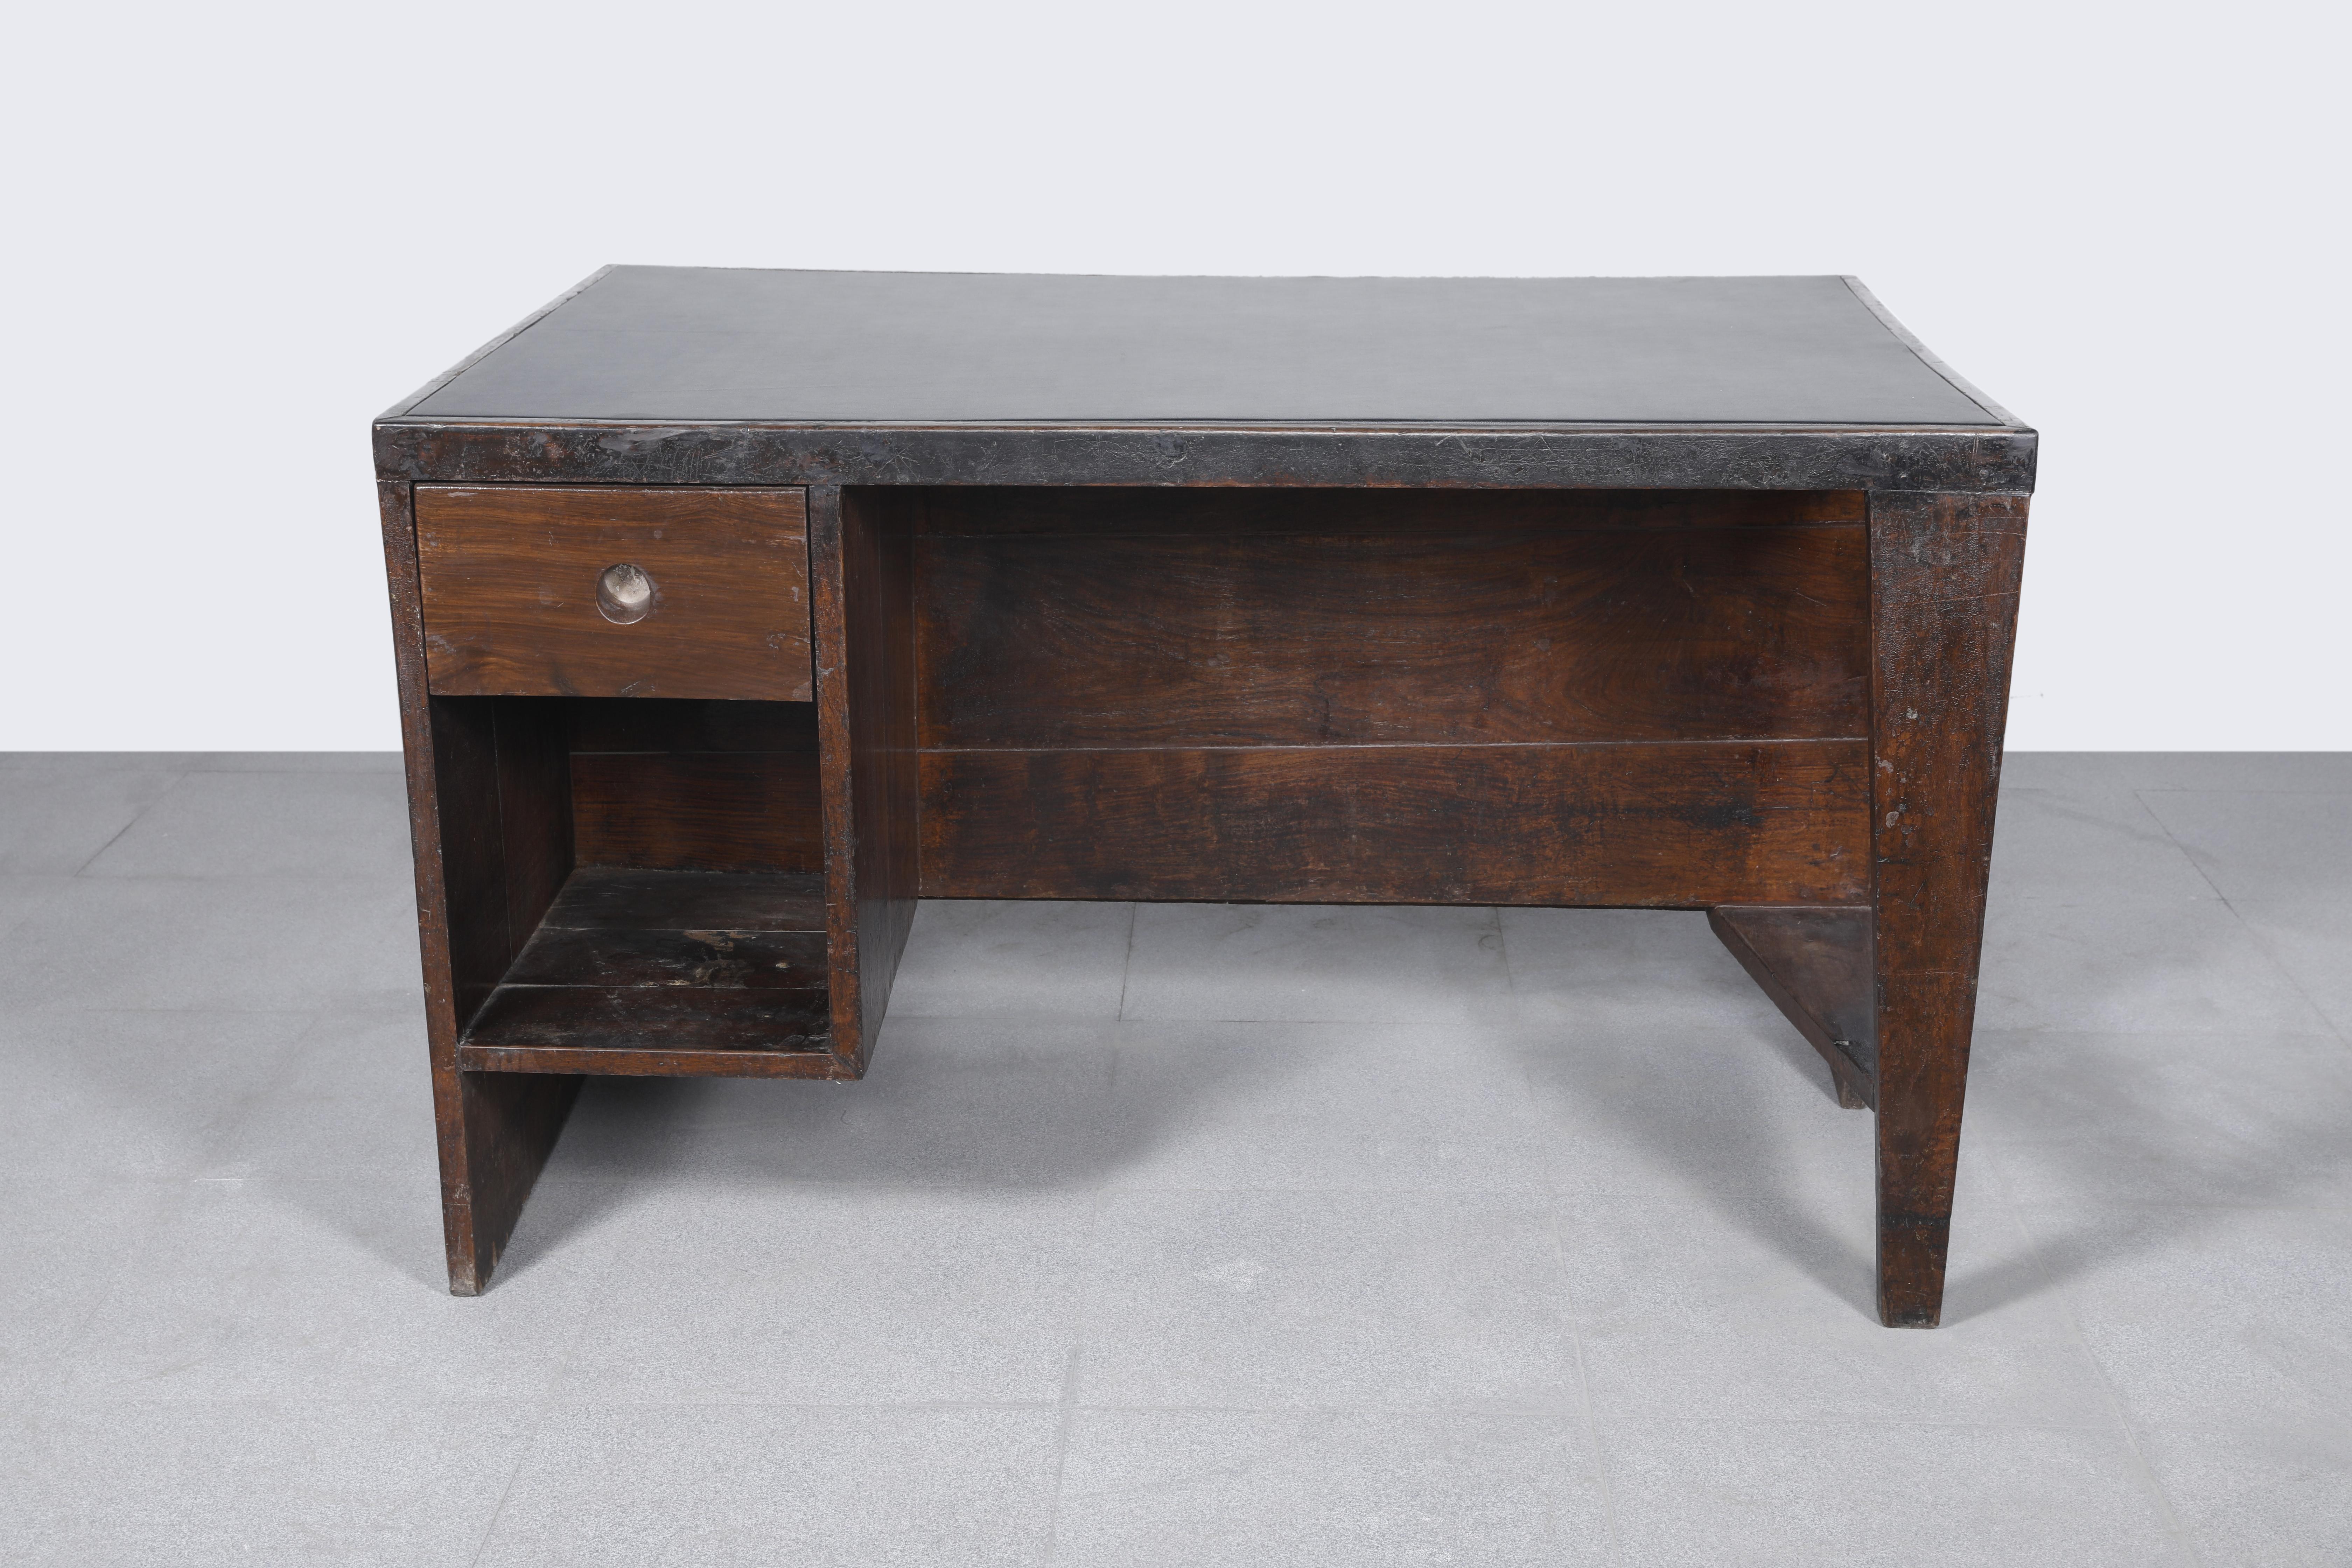 Office desk, 1957-1958. Rectangular top covered in black leather on a frame, affixed on one side by a panel forming a left side leg with a box section including a drawer and compartment and on the other side, a profiled leg with a flat triangular